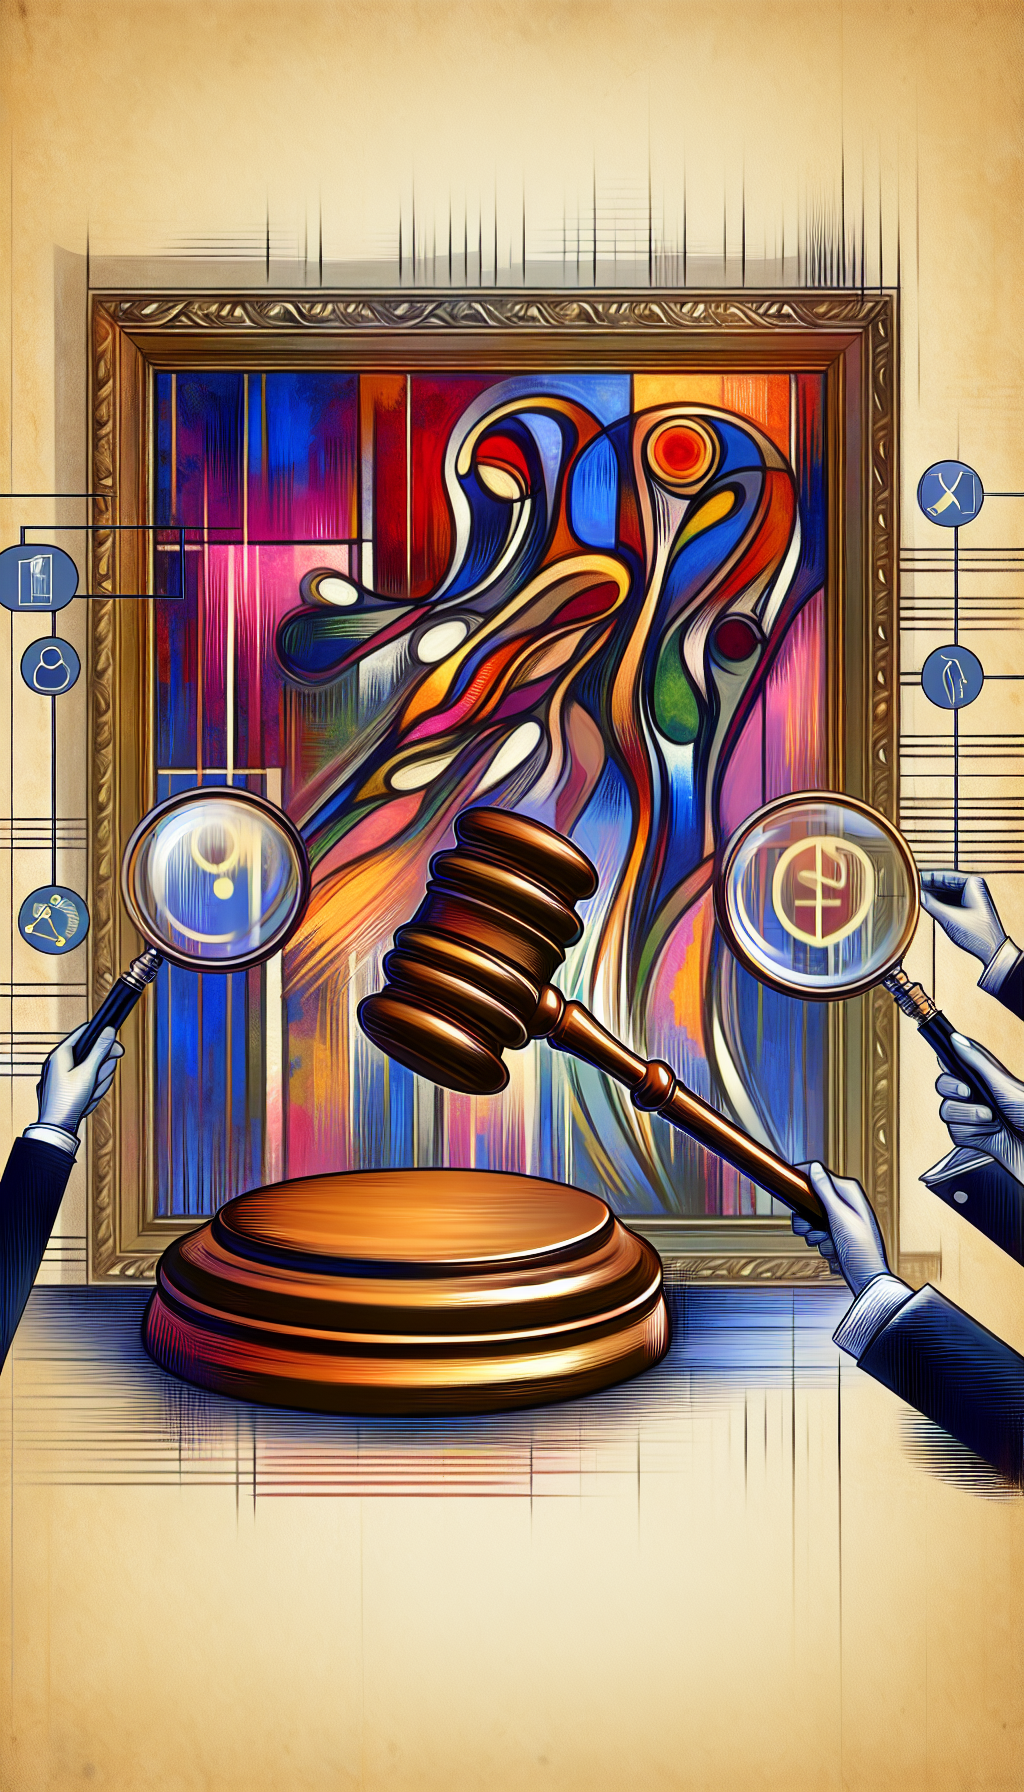 An illustration of an elegant, stylized auction gavel poised above a vibrant, abstract painting by Charles Bibbs, with magnifying glasses hovering over, inspecting various elements like cultural significance, rarity, and demand, visually represented by icons. The background subtly shifts from classic to contemporary, symbolizing the fluid value assessment in the art market.